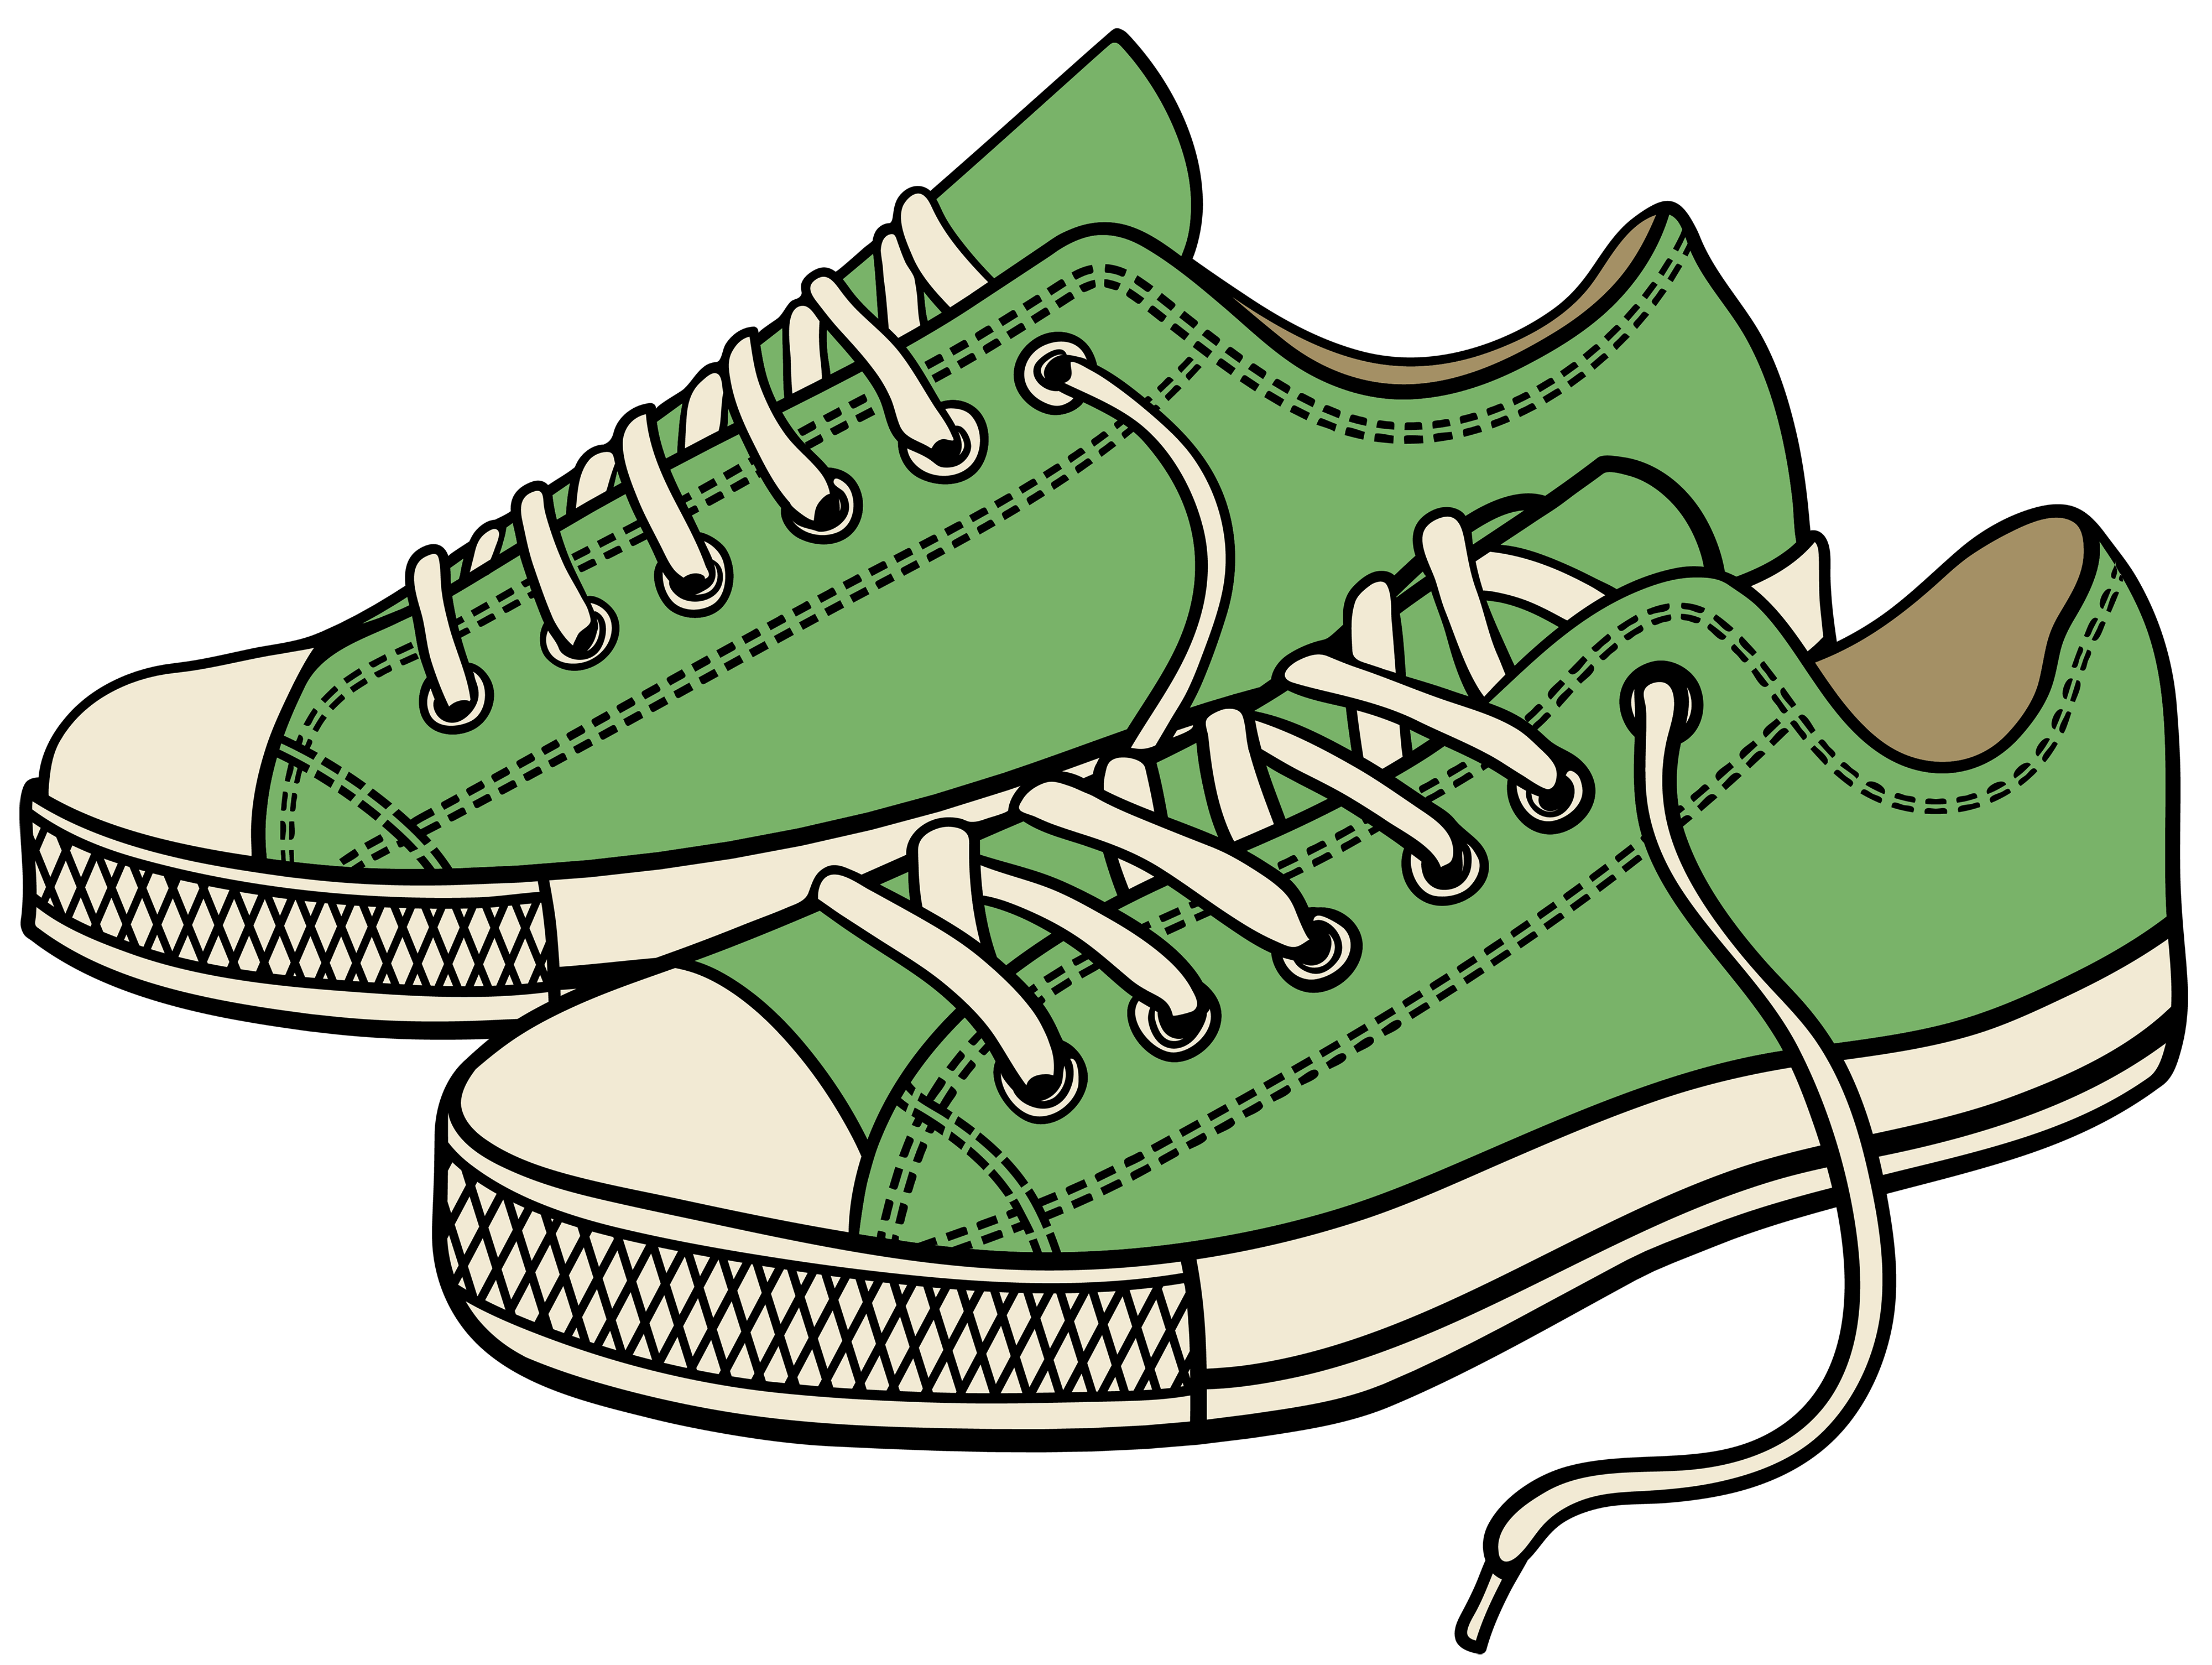 Sneaker tennis shoes clipart black and white free 2 